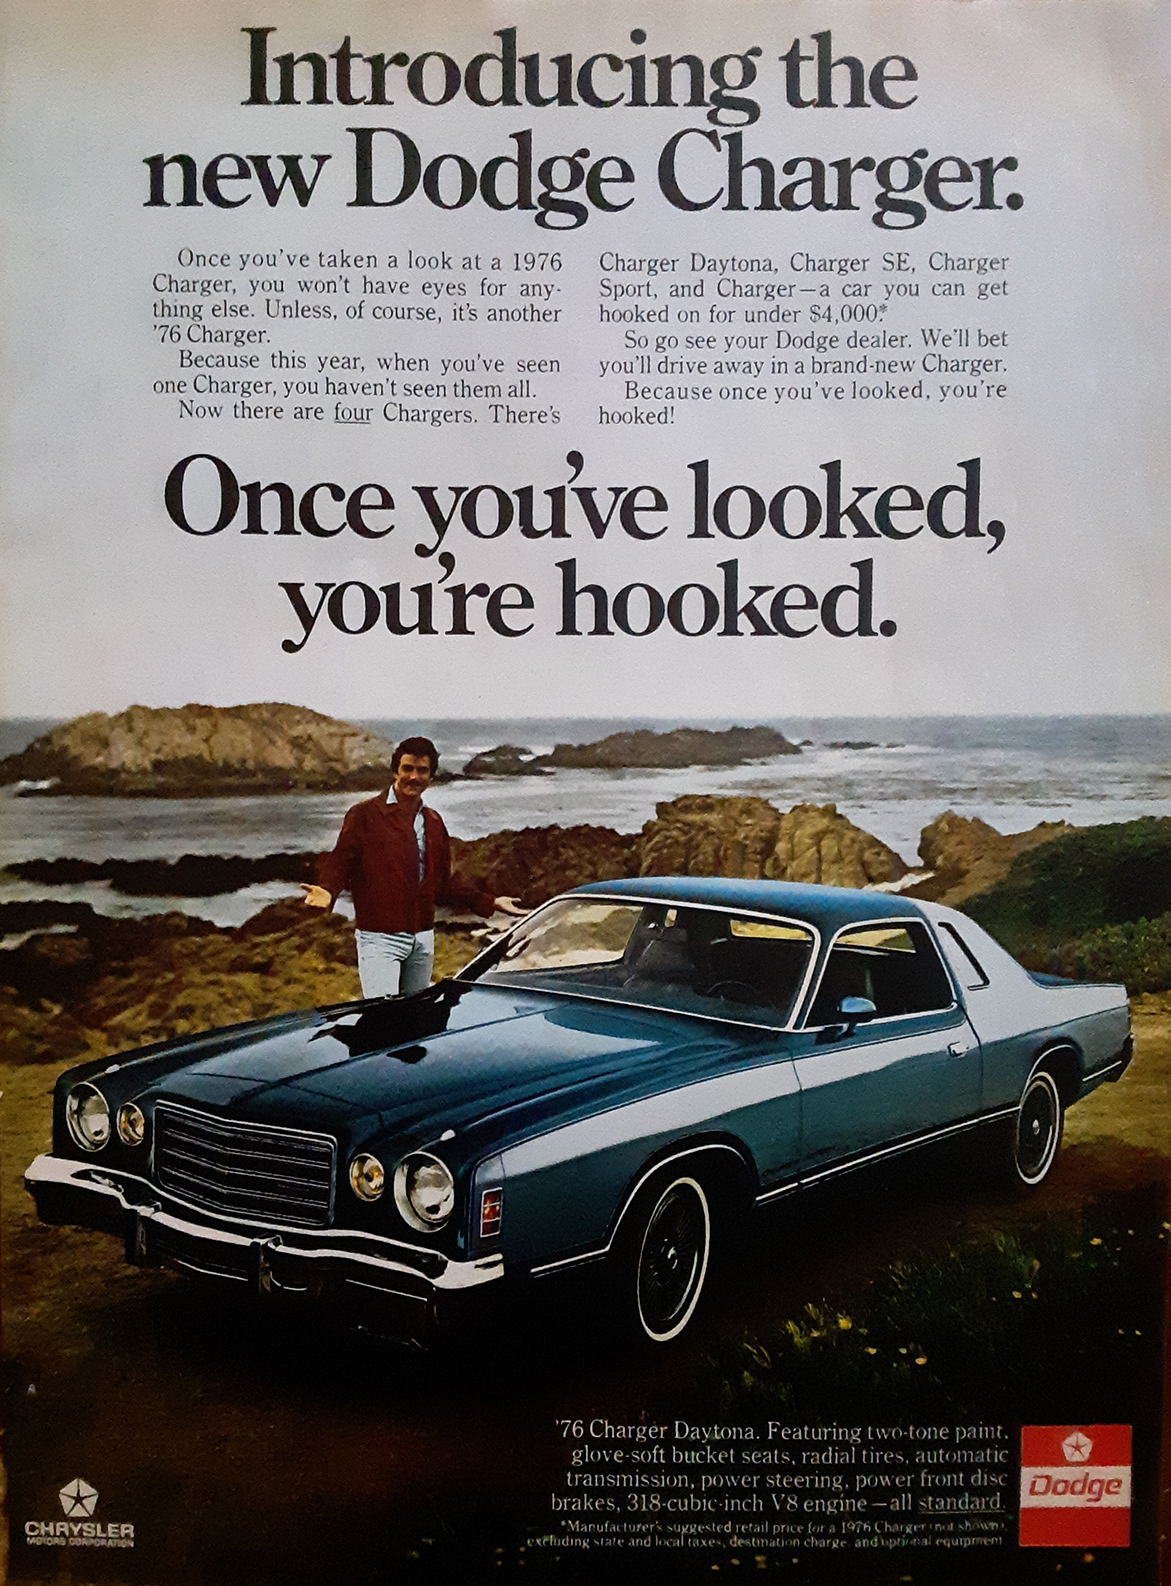 Old Dodge Charger ad